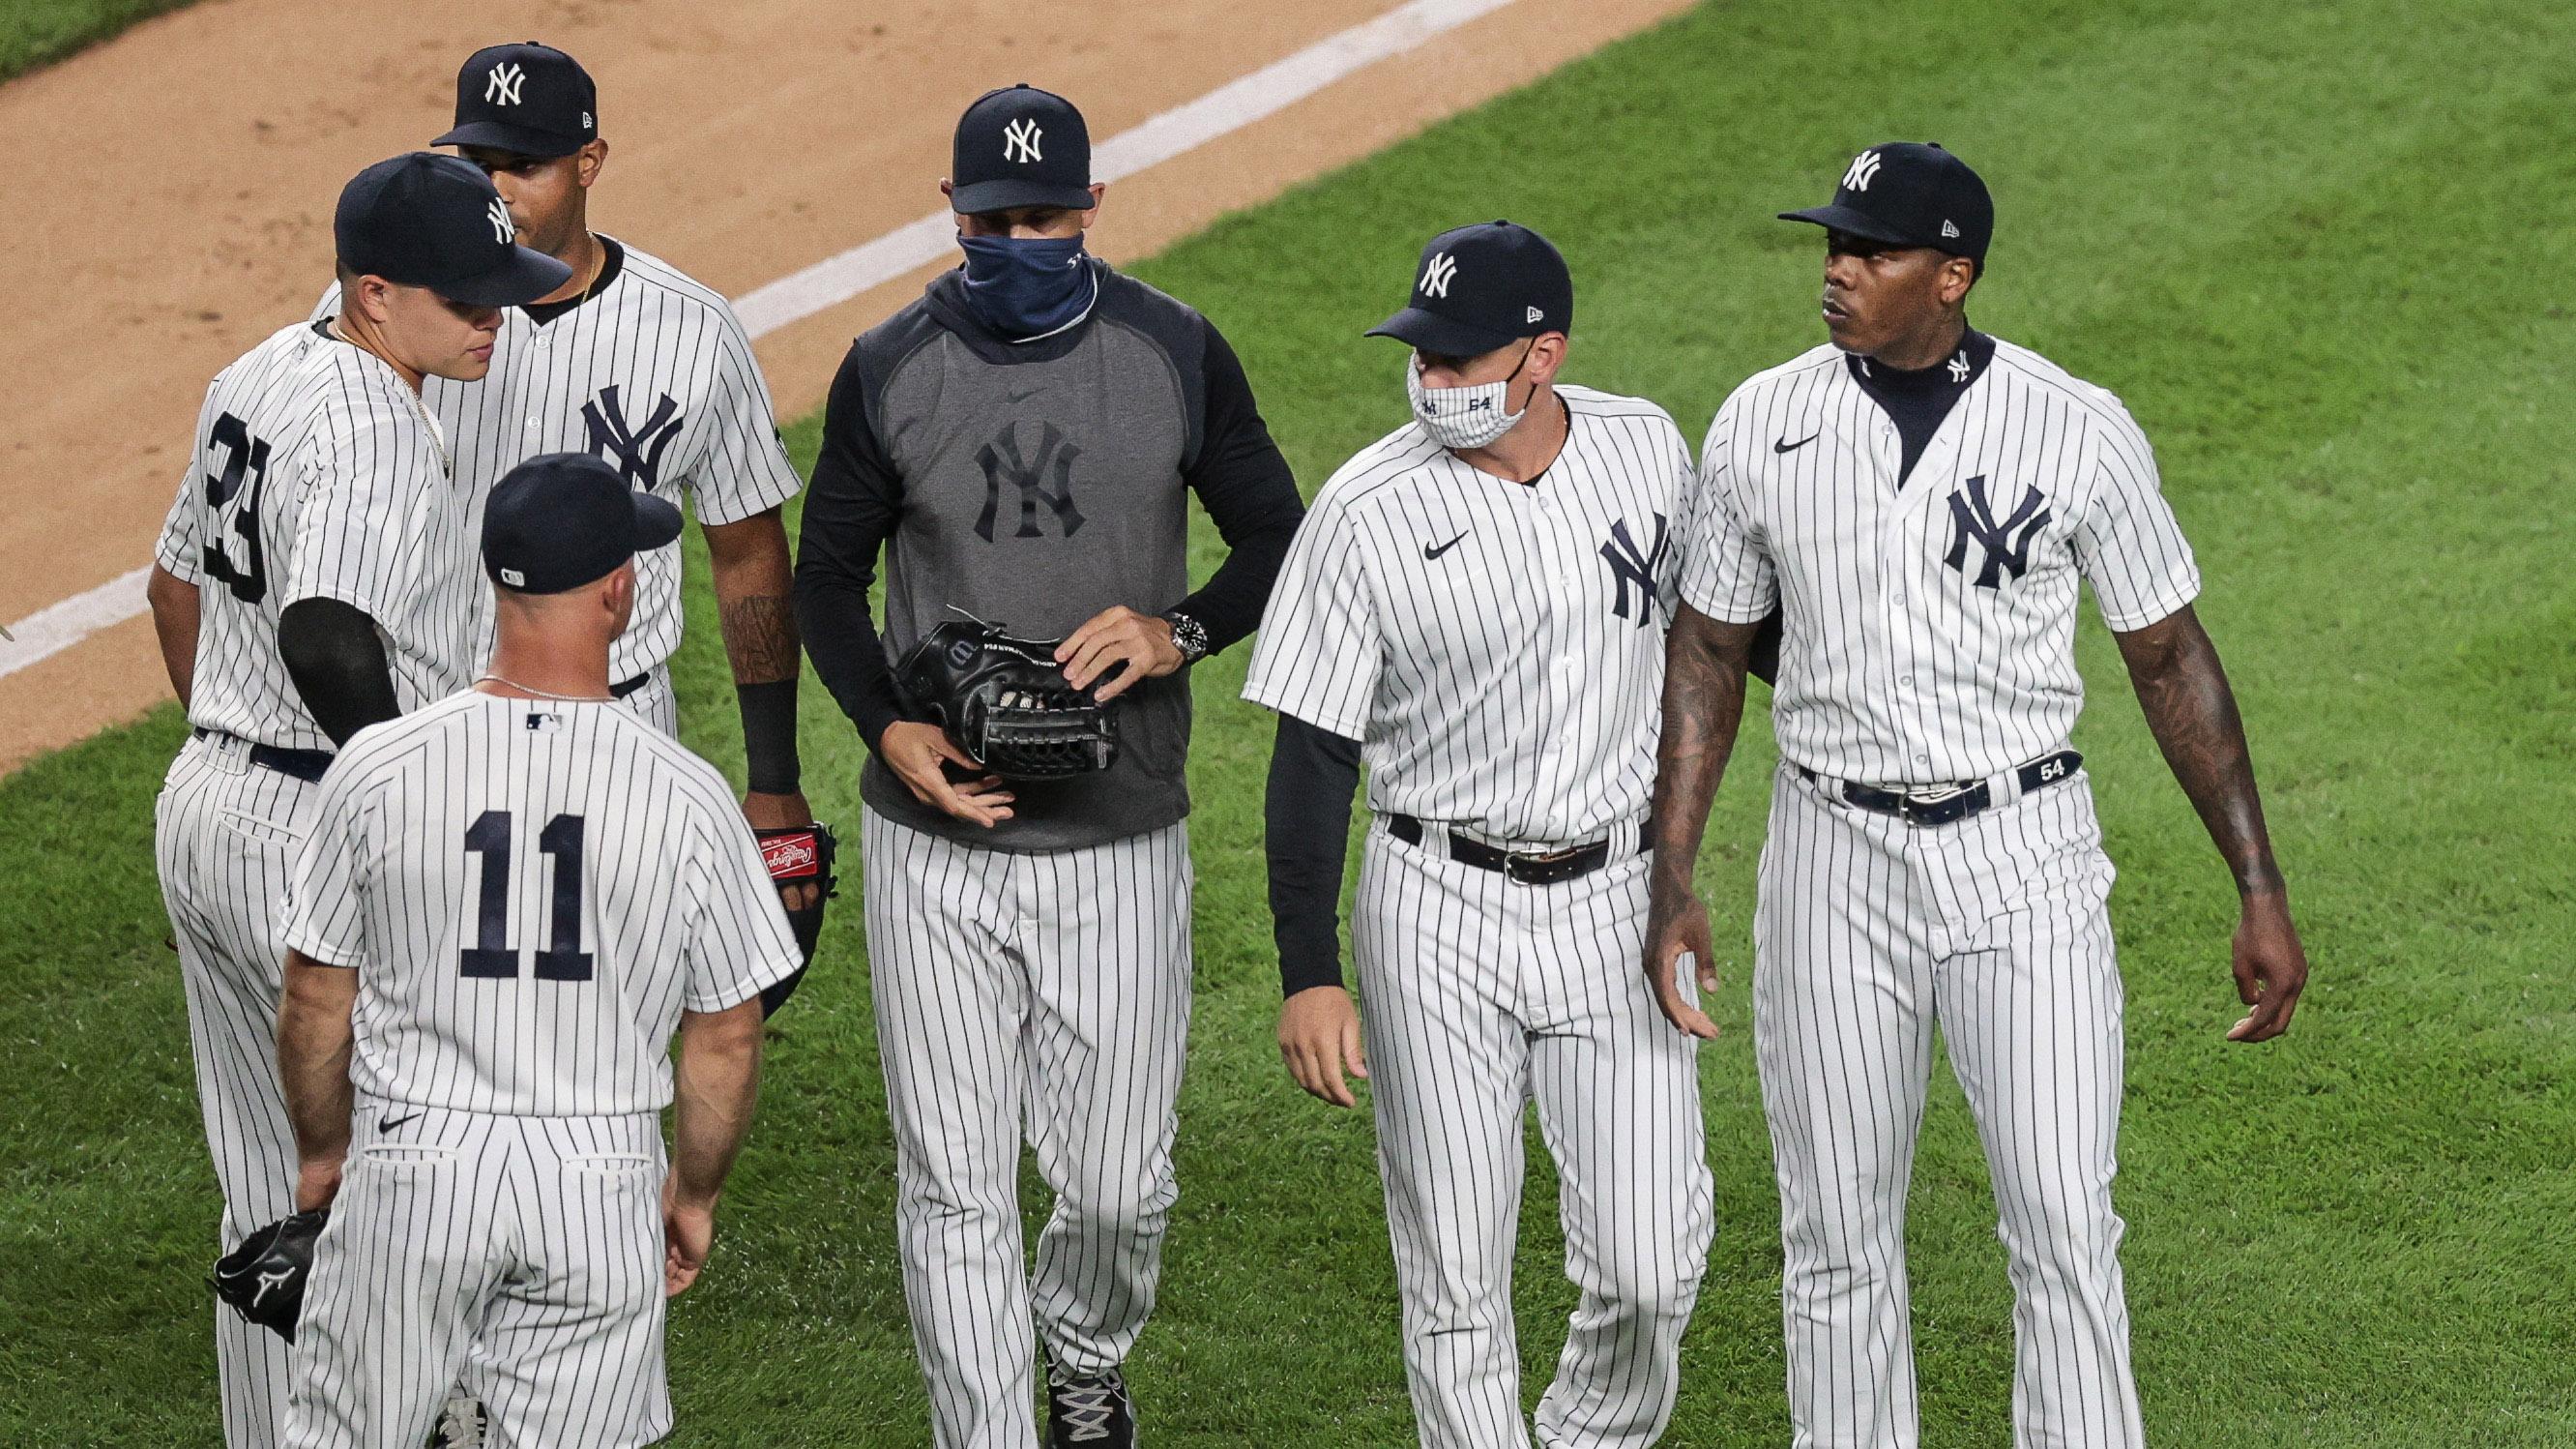 Yankees walk off field after scuffle with Rays / USA TODAY